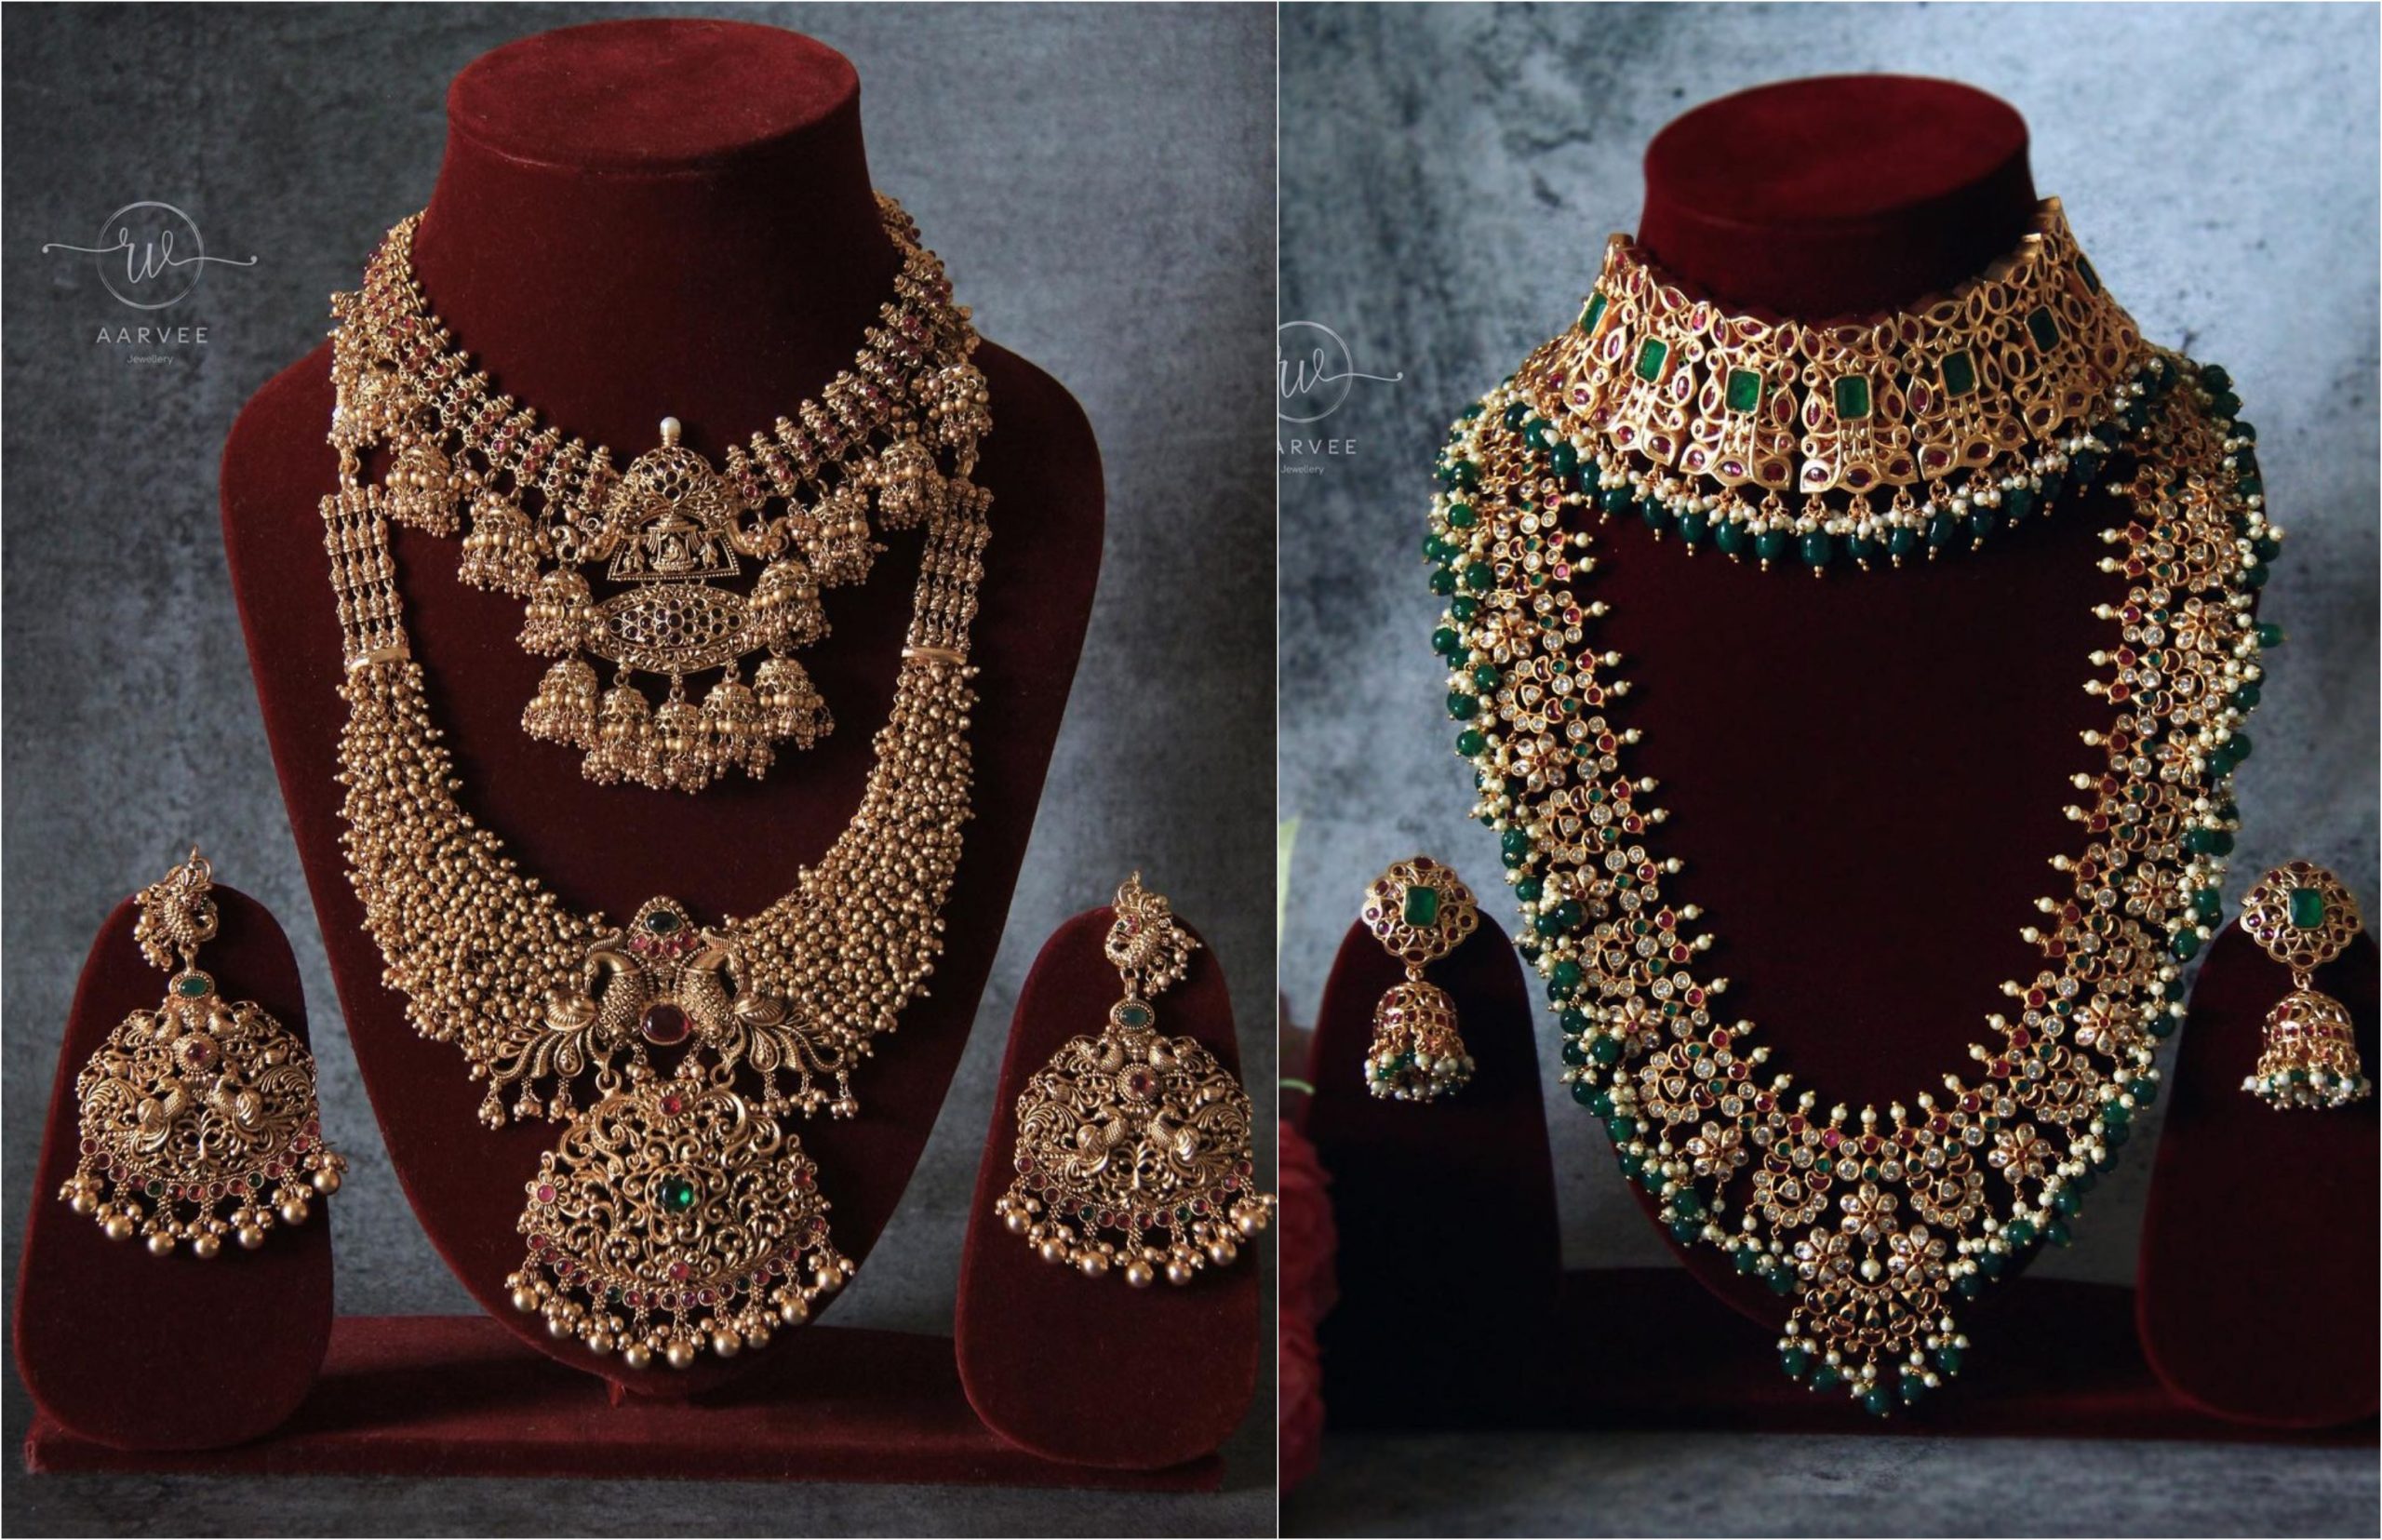 Exquisite Traditional Jewellery Collection By Aarvee!